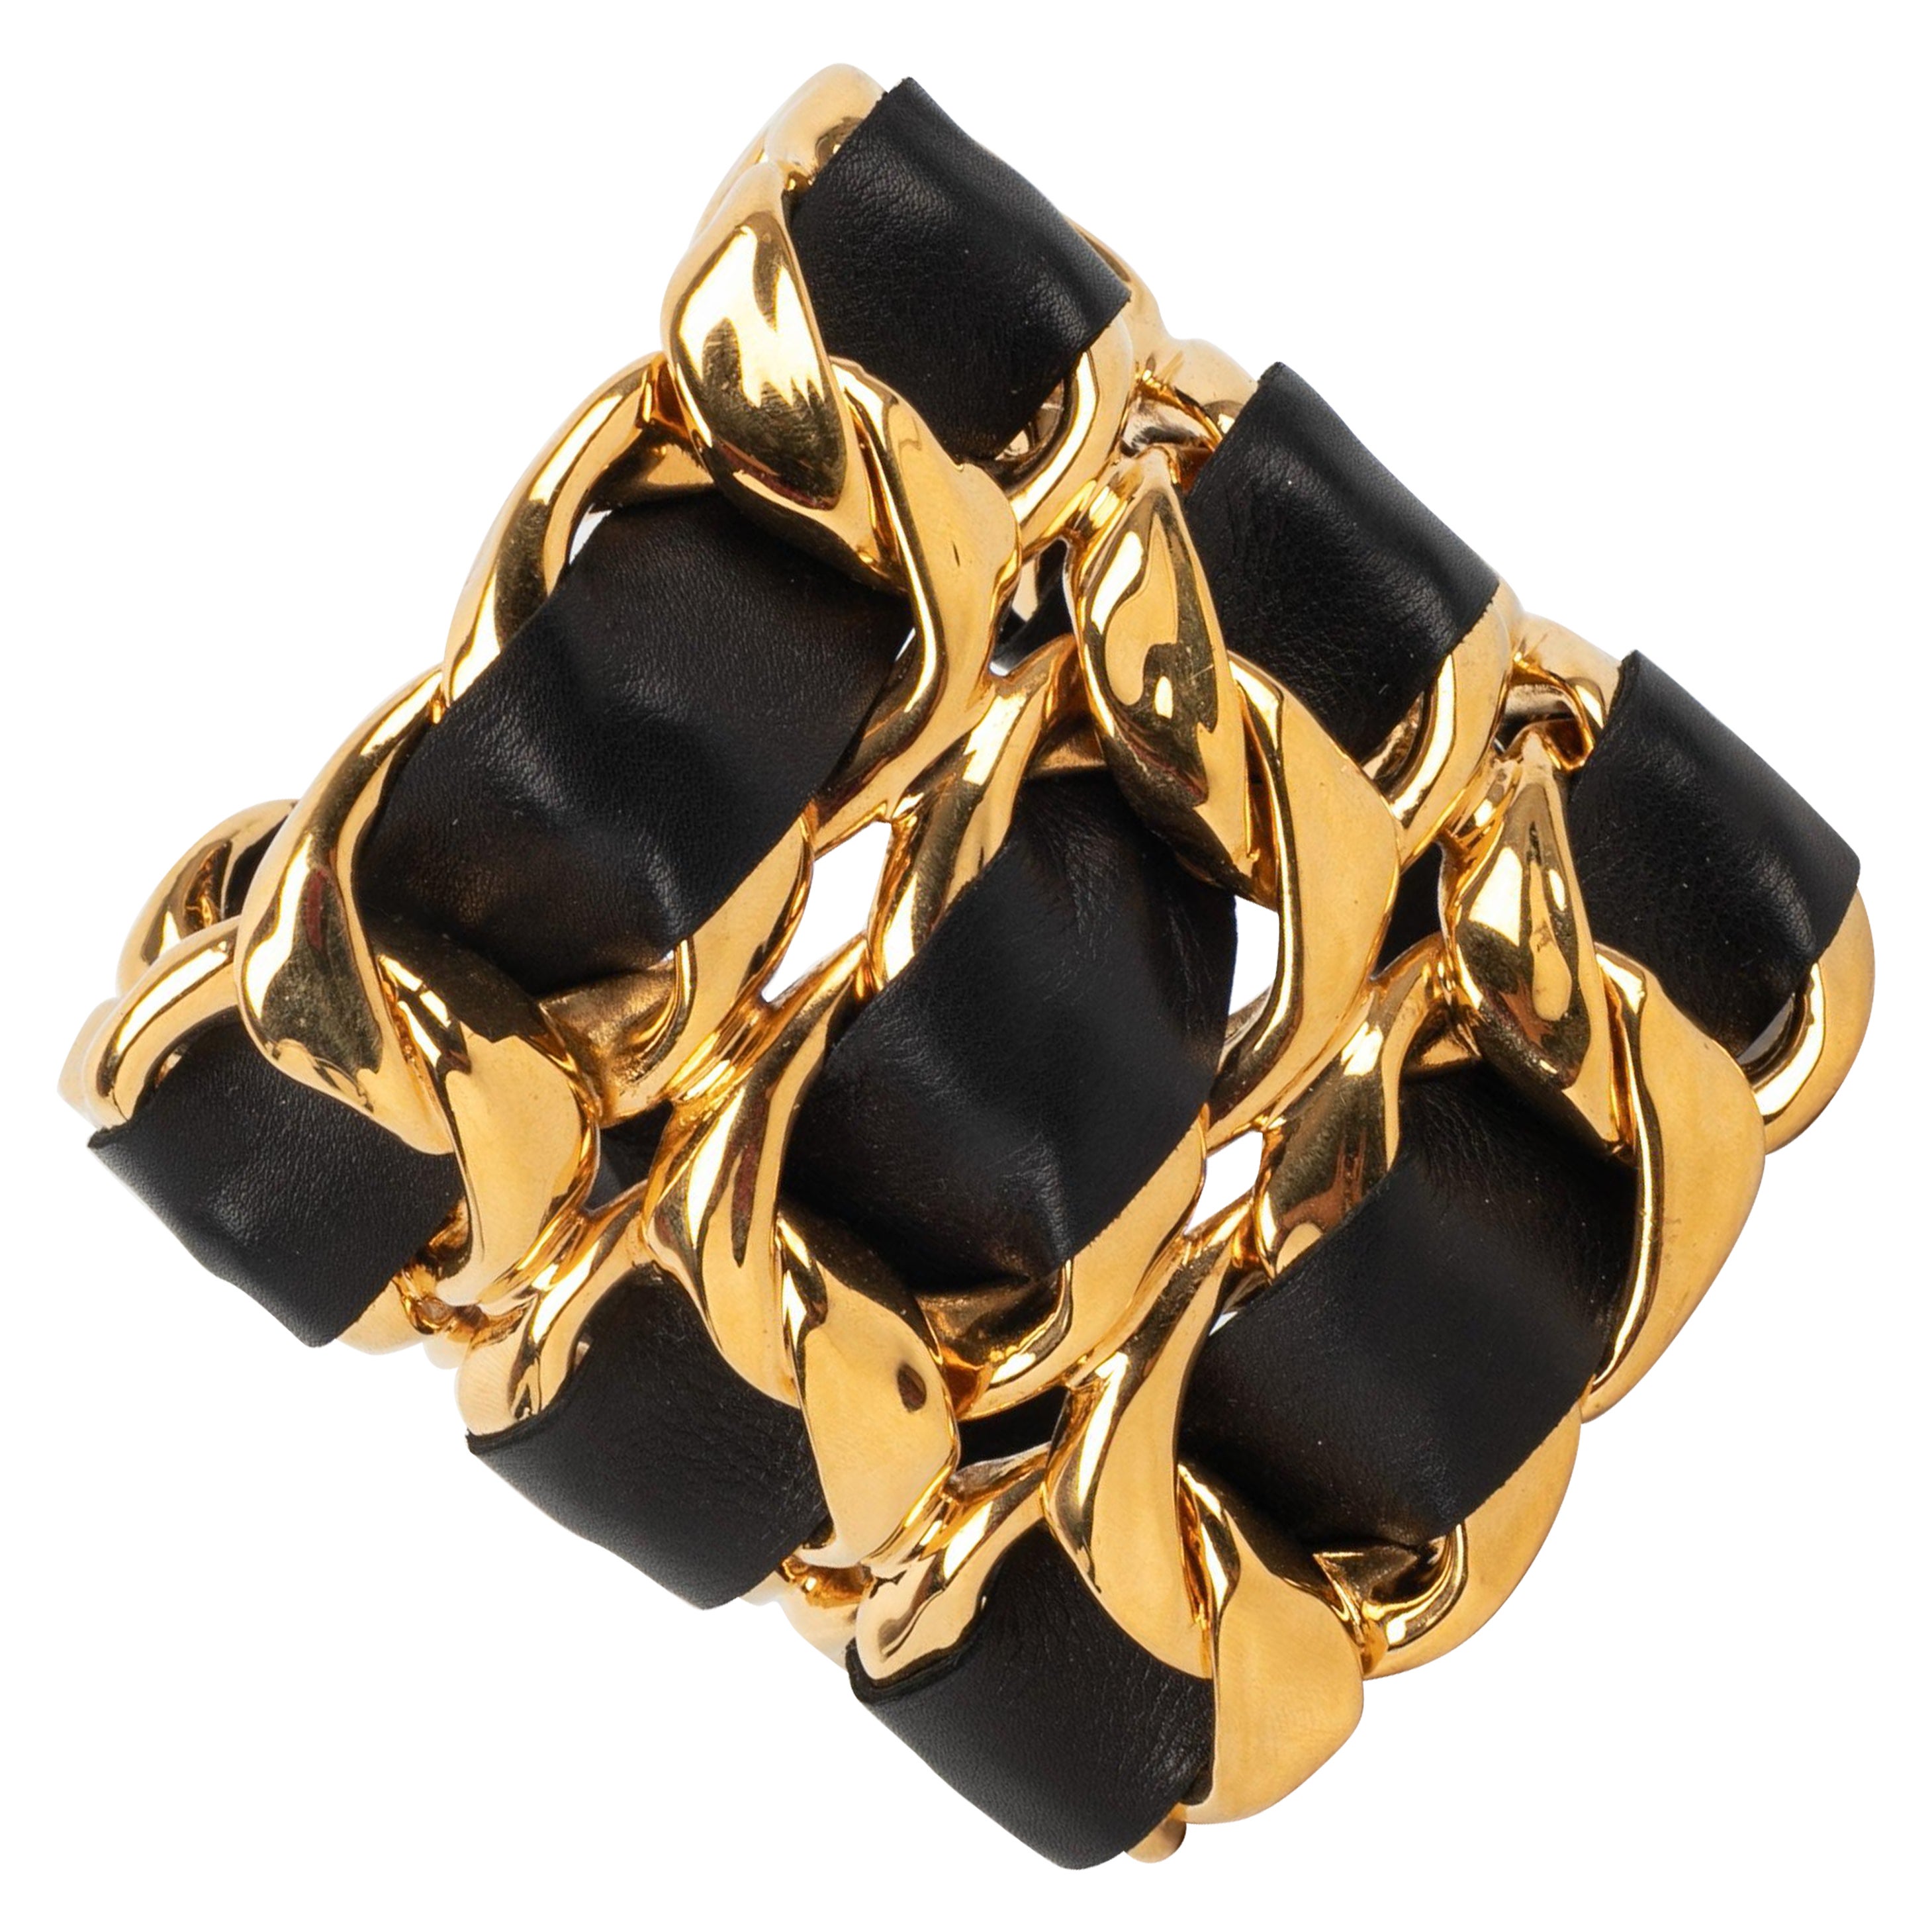 Chanel Cuff Bracelet in Golden Metal with Black Leather, 1980s For Sale